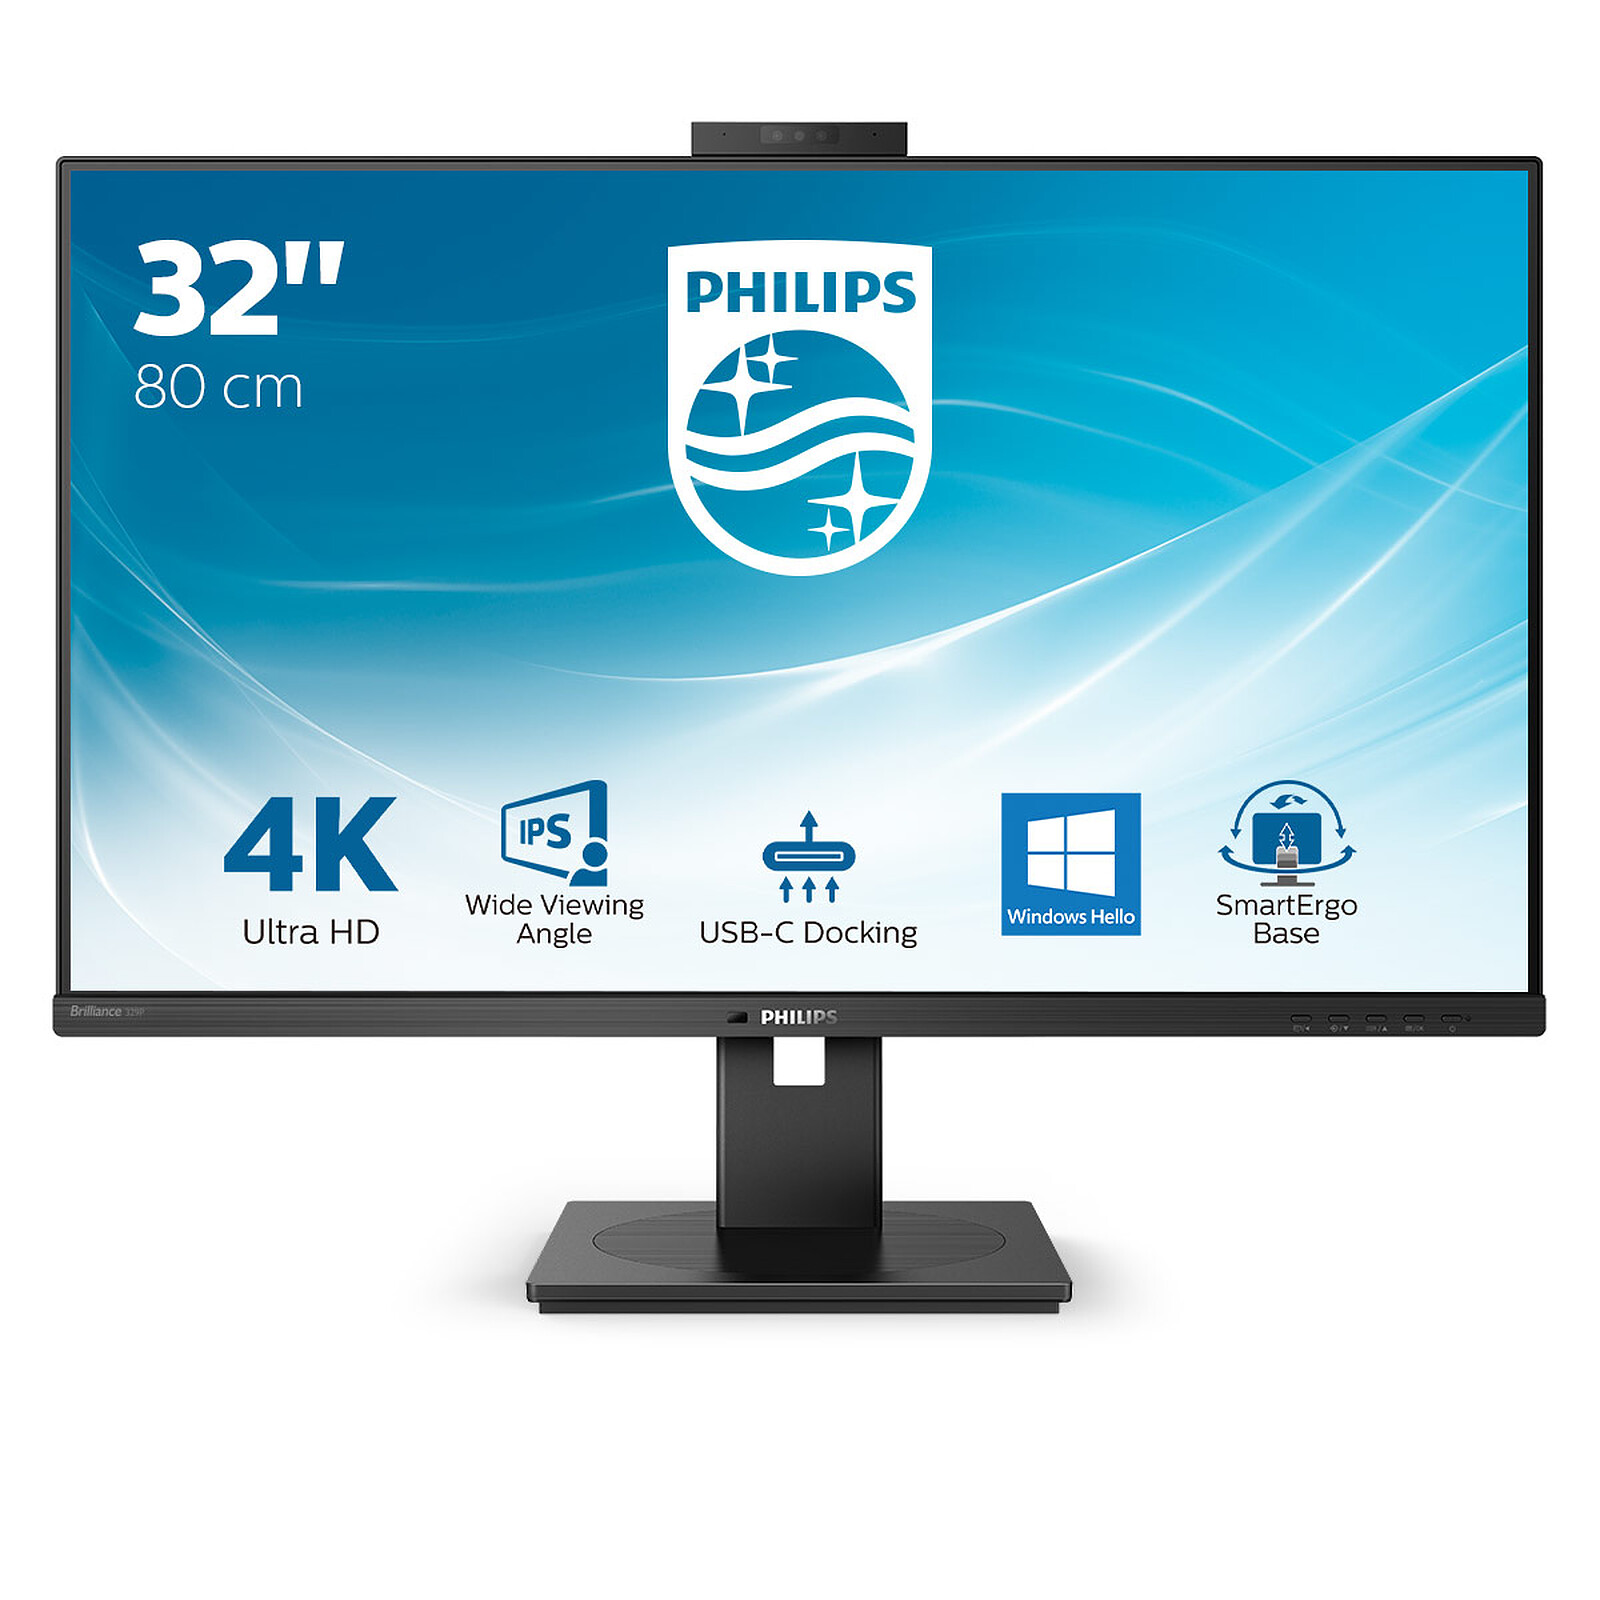 can i use my philips webcam on a new computer?